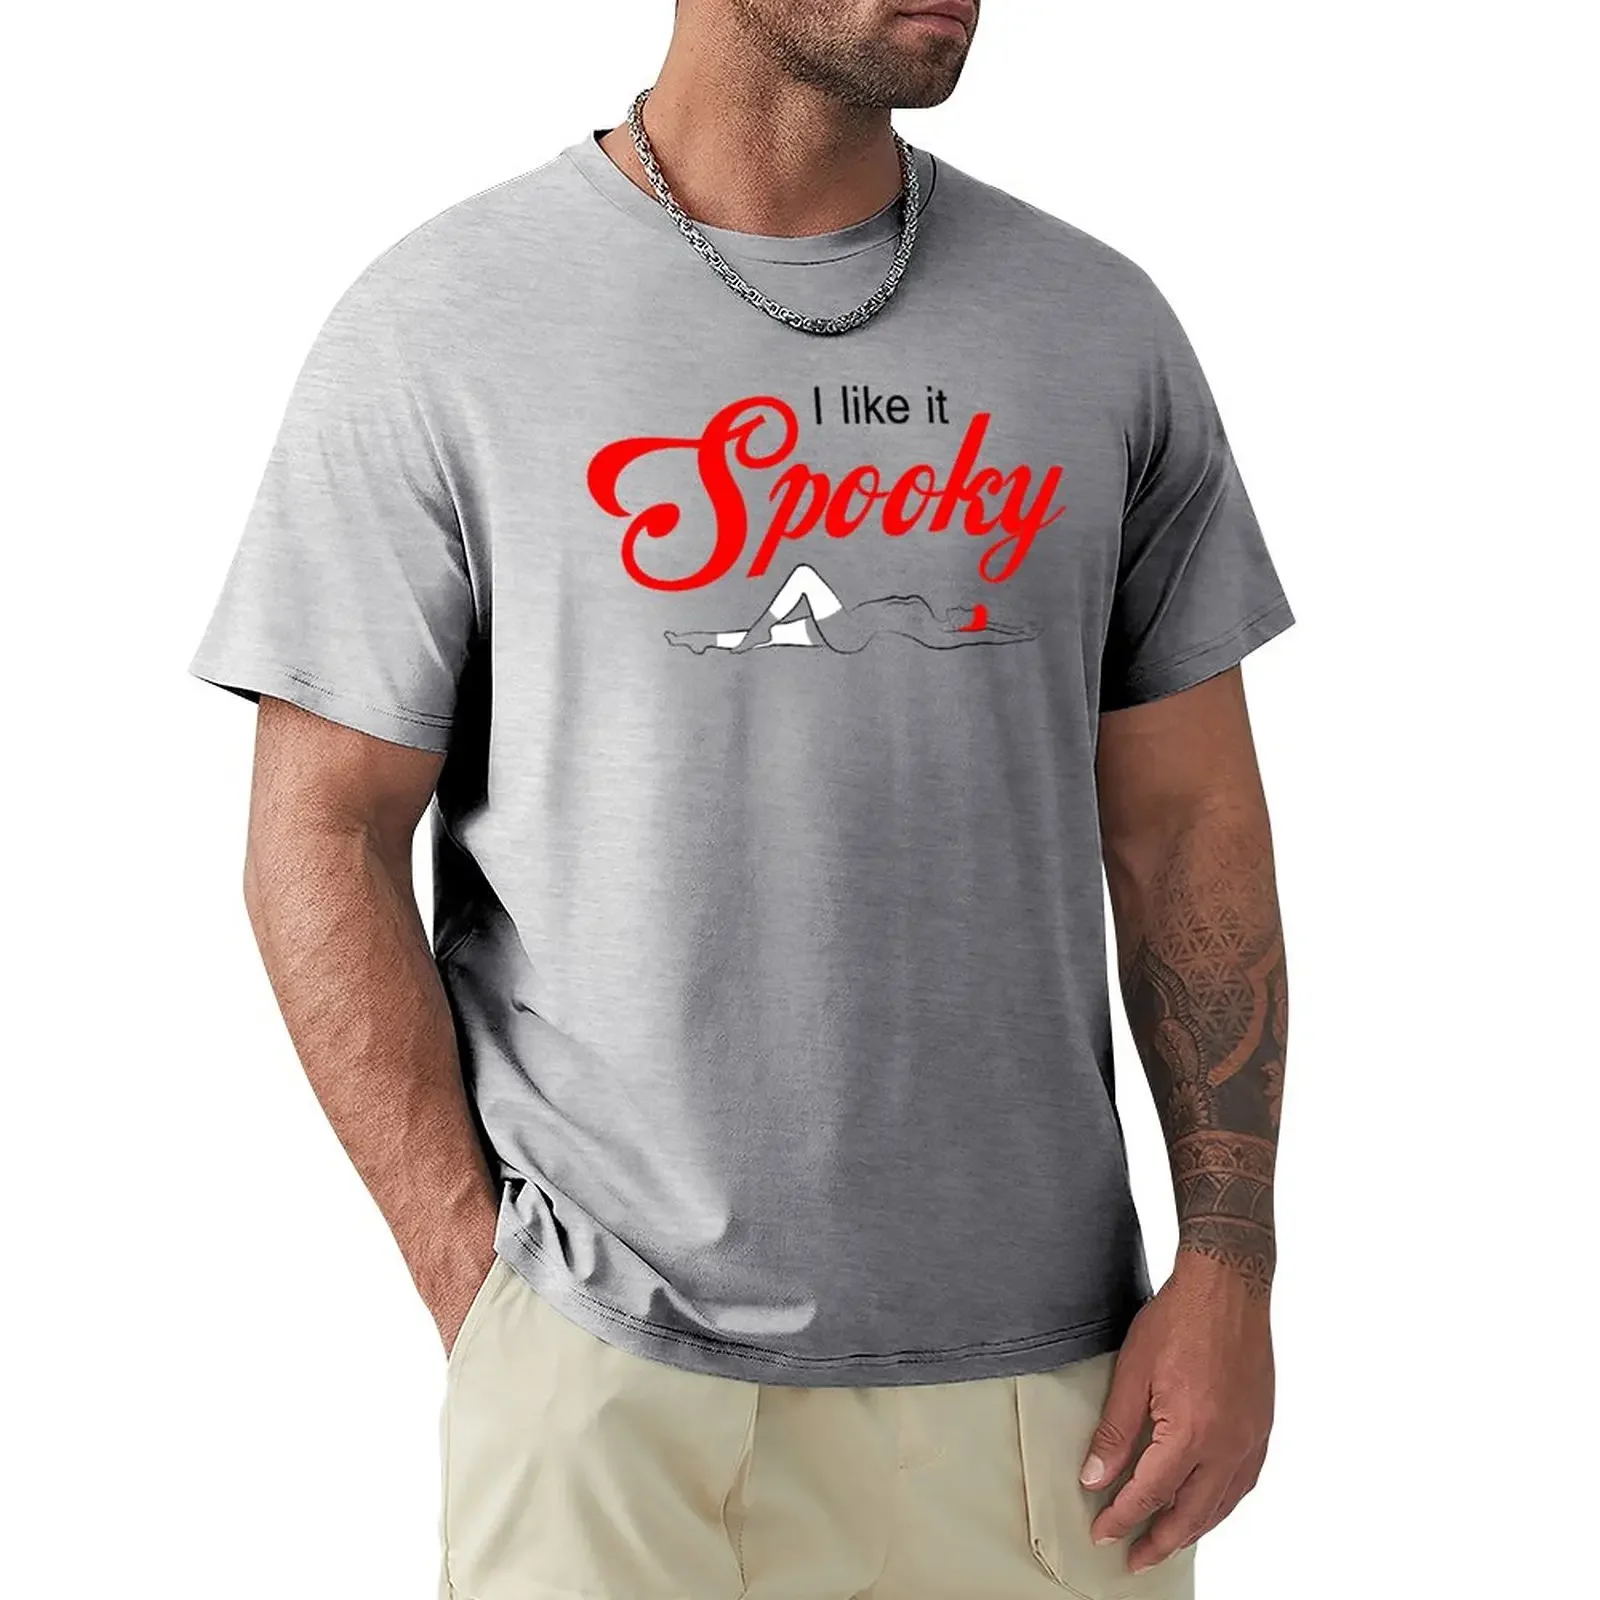 

I Like It Spooky T-Shirt quick-drying sports fans cute tops animal prinfor boys mens t shirts